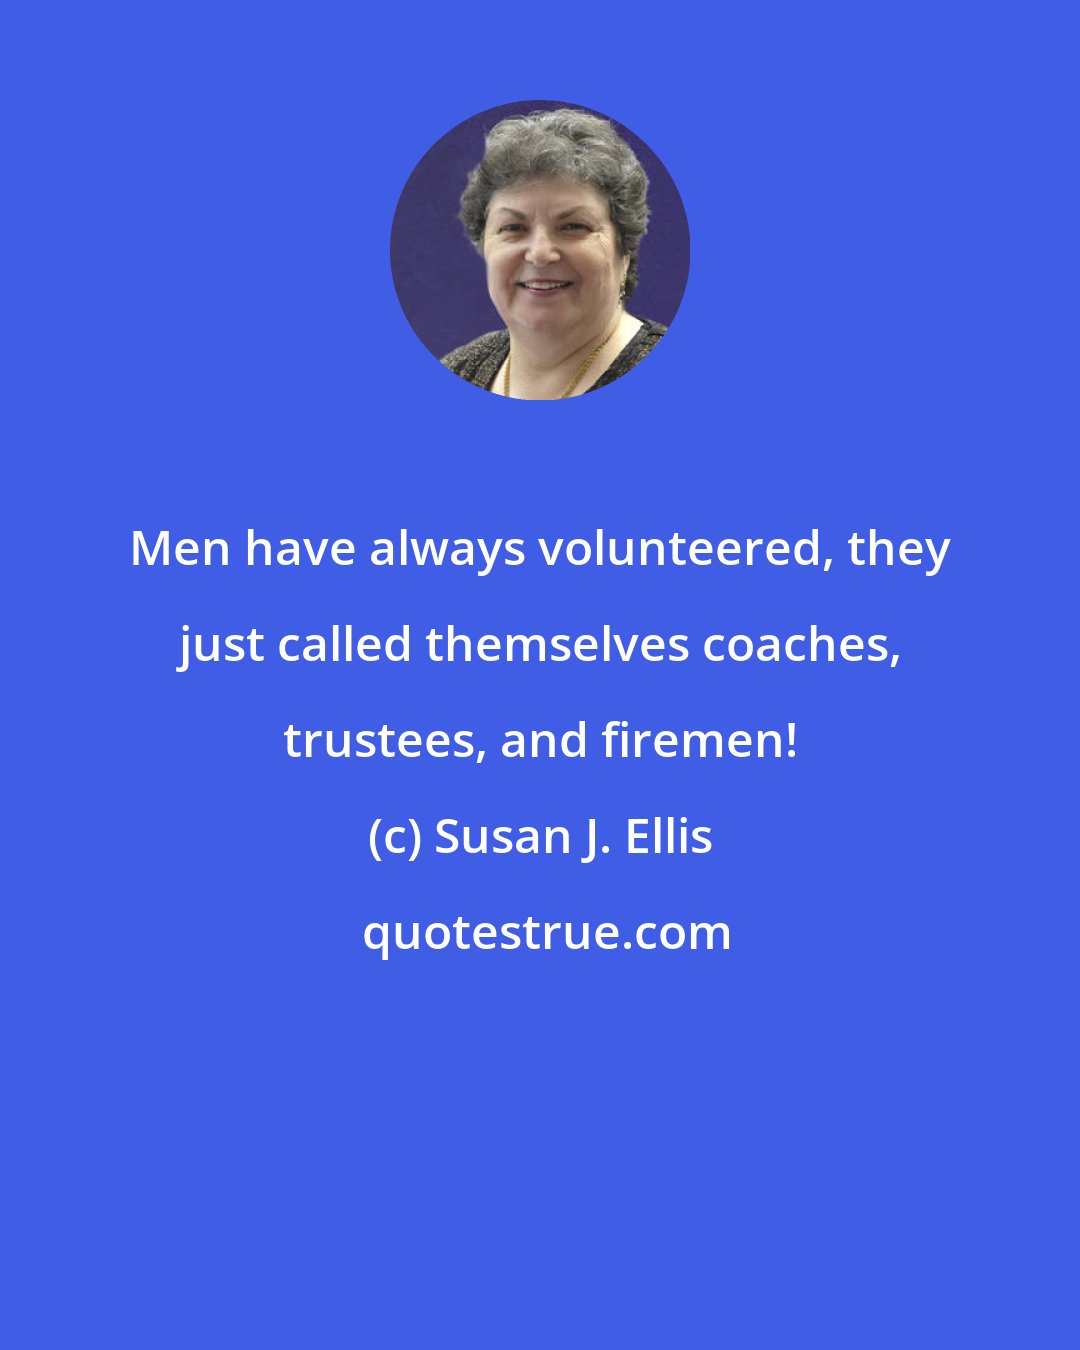 Susan J. Ellis: Men have always volunteered, they just called themselves coaches, trustees, and firemen!